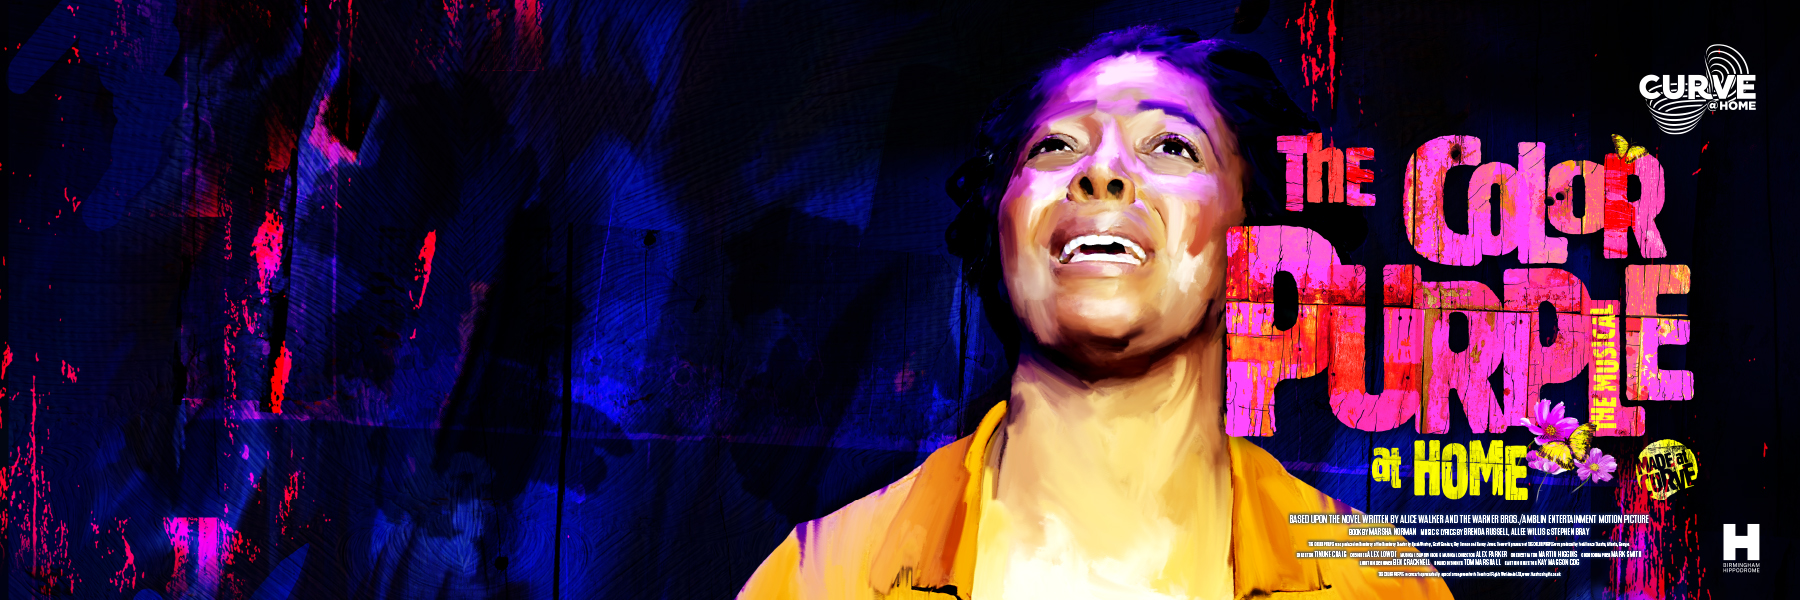 Promotional artwork for The Color Purple - at Home.